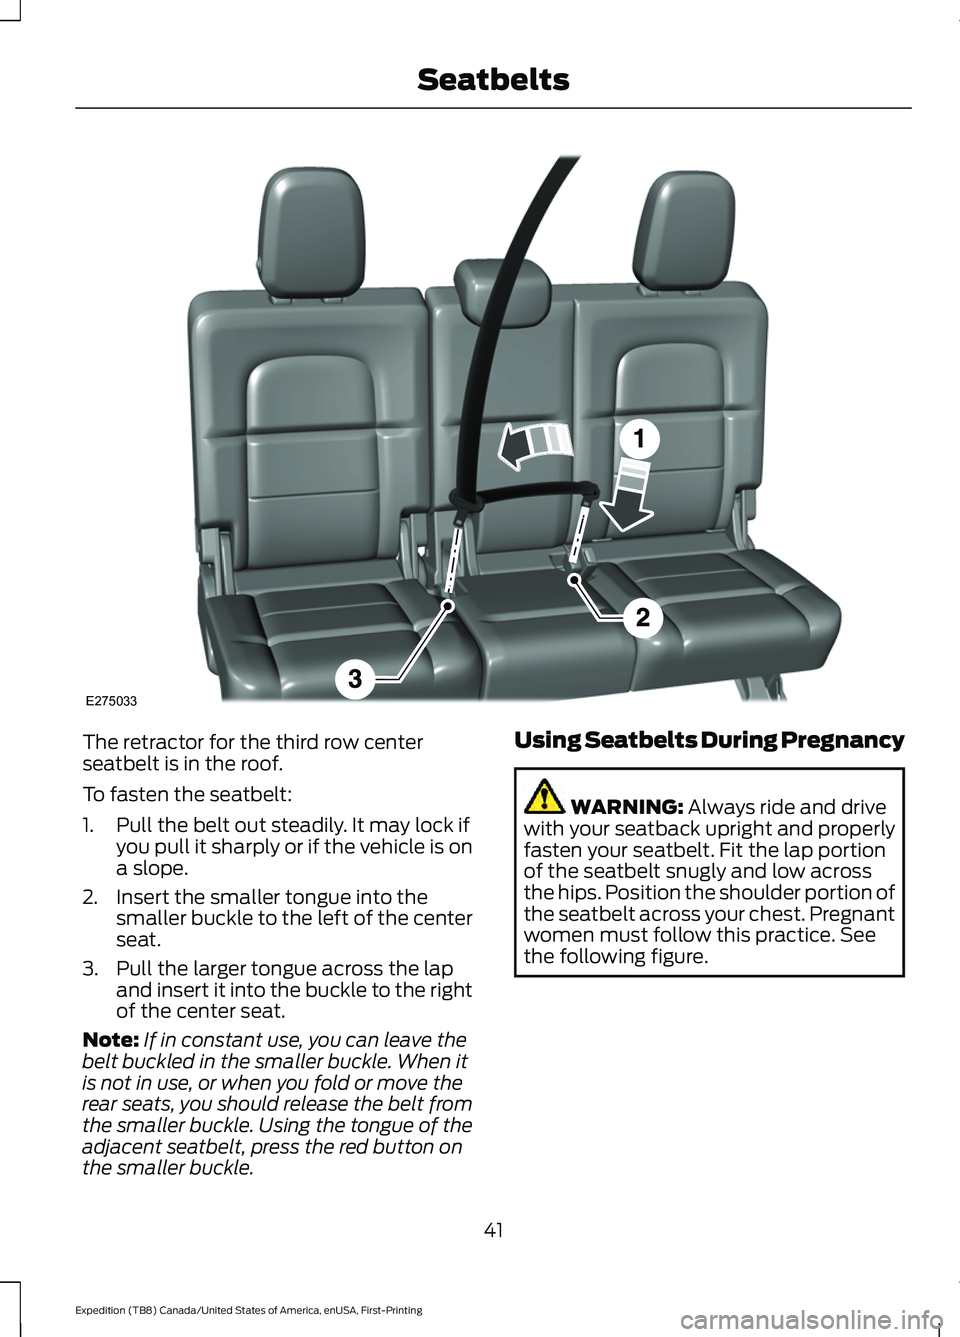 FORD EXPEDITION 2021 Service Manual The retractor for the third row center
seatbelt is in the roof.
To fasten the seatbelt:
1. Pull the belt out steadily. It may lock if
you pull it sharply or if the vehicle is on
a slope.
2. Insert the